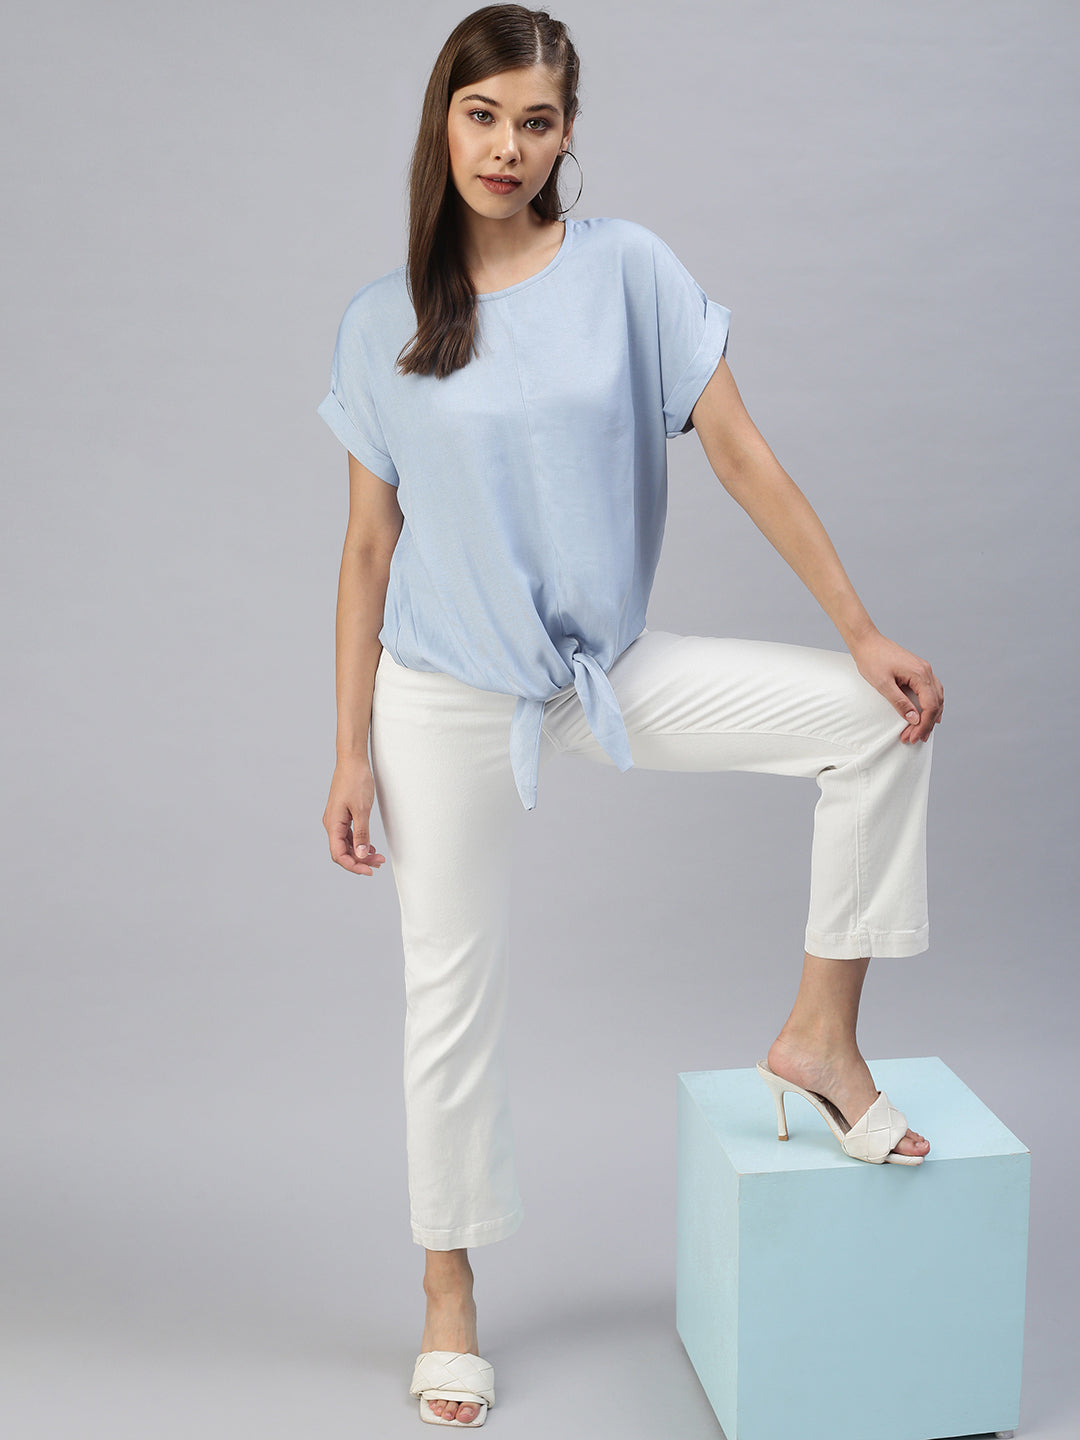 Women Solid Blue Cinched Waist Top